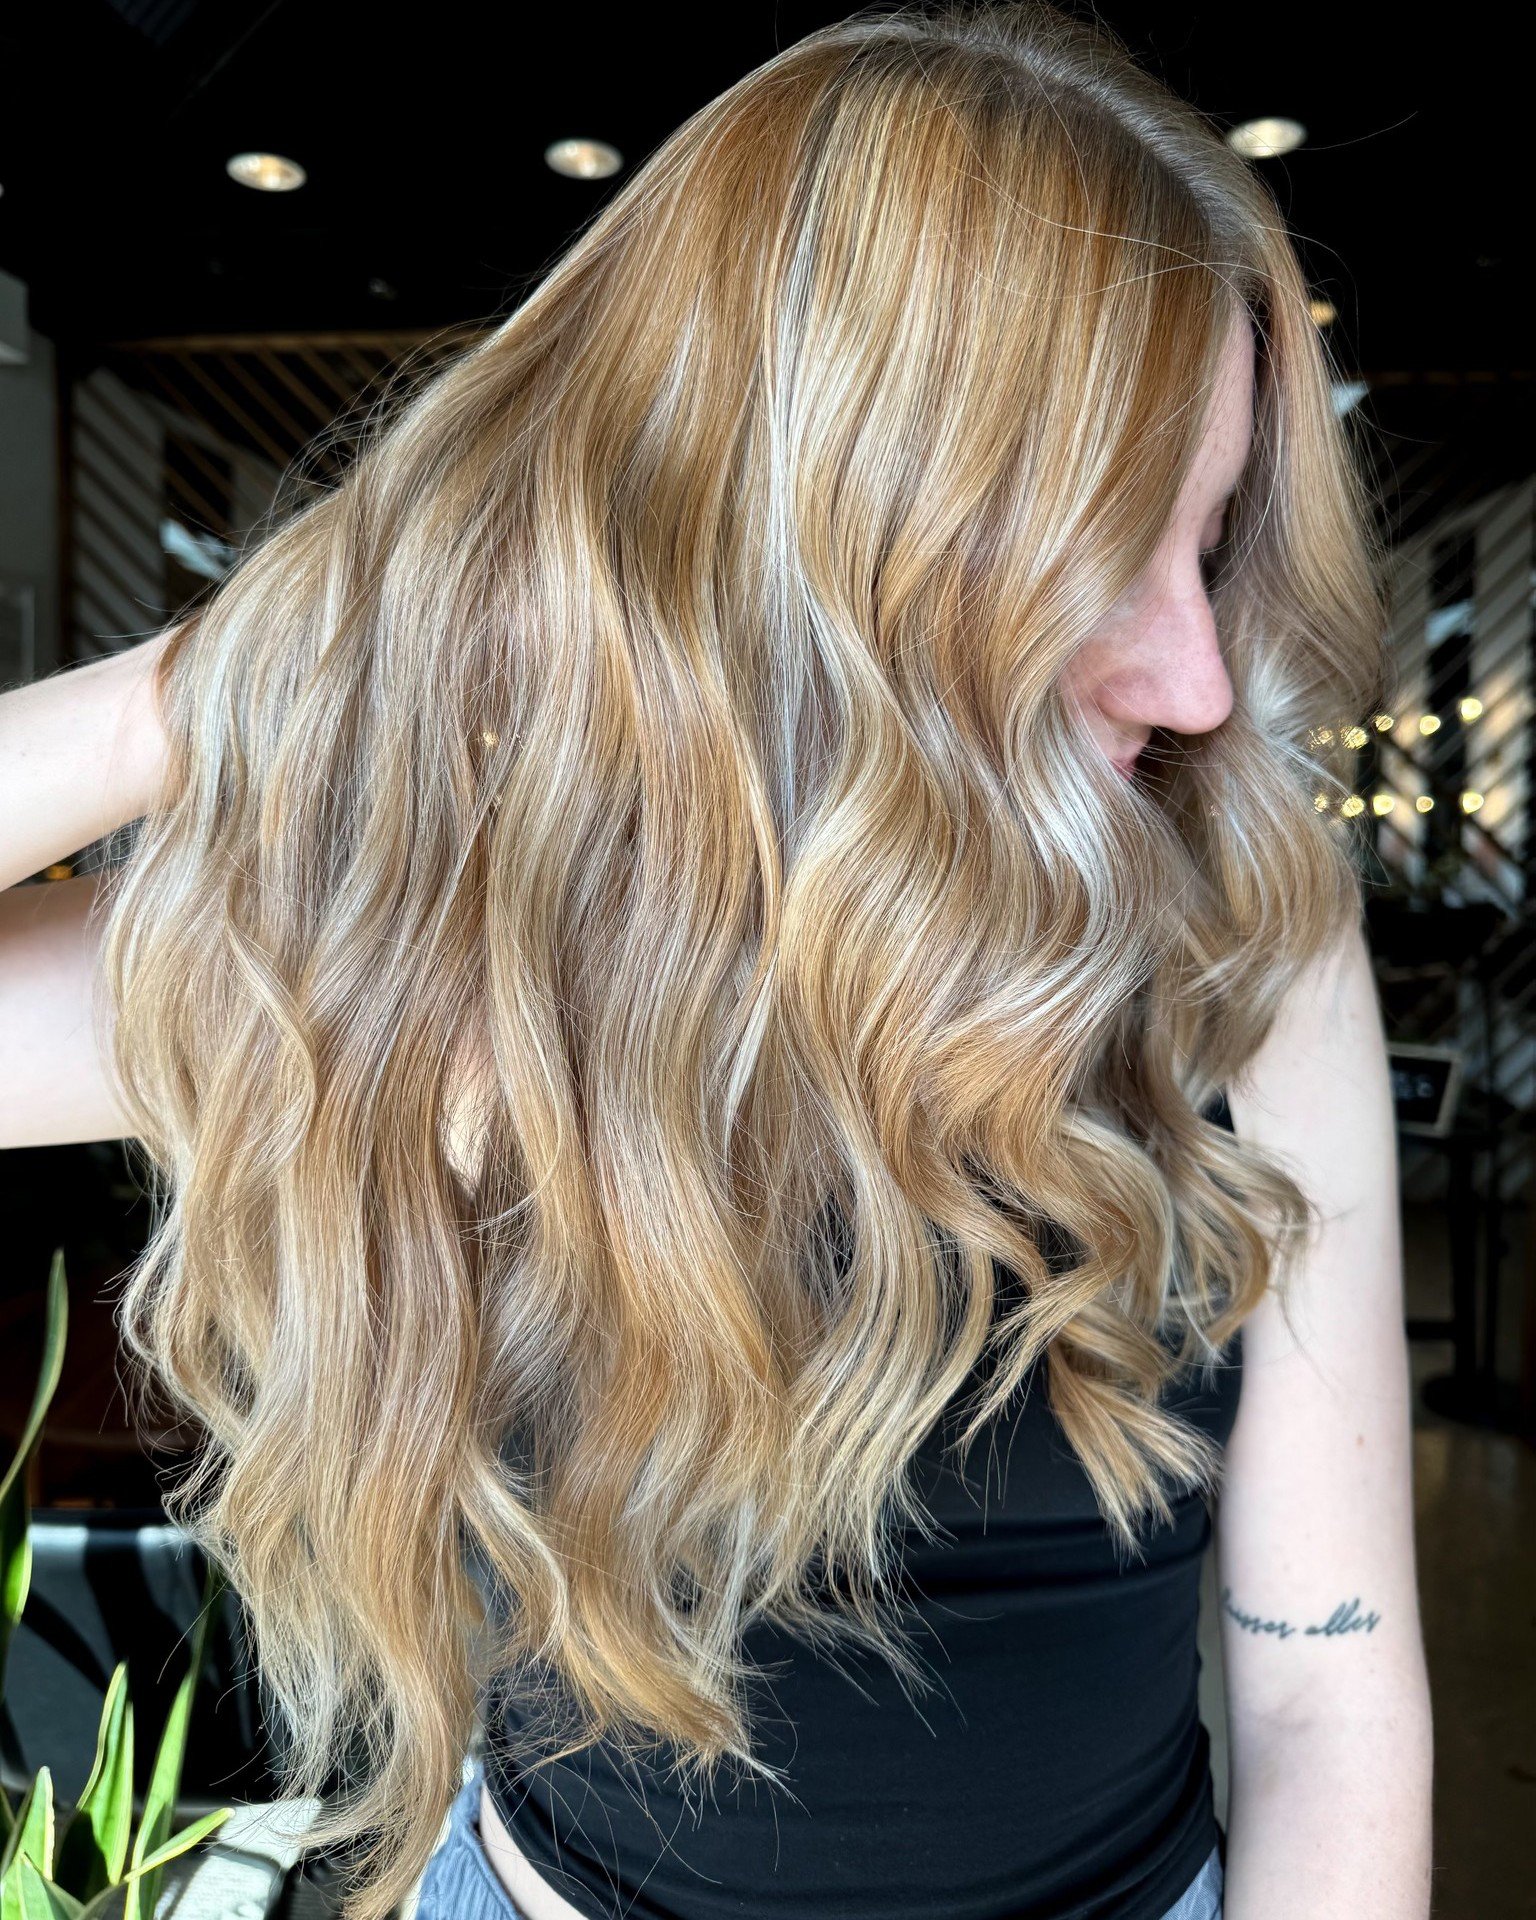 Kayla absolutely slayed this color transformation on one of our beautiful stylists!

We've already introduced you to Kayla but we want you to know exactly who she is when you step into Reverie. ⚡

She is crushing every part of the associate program a